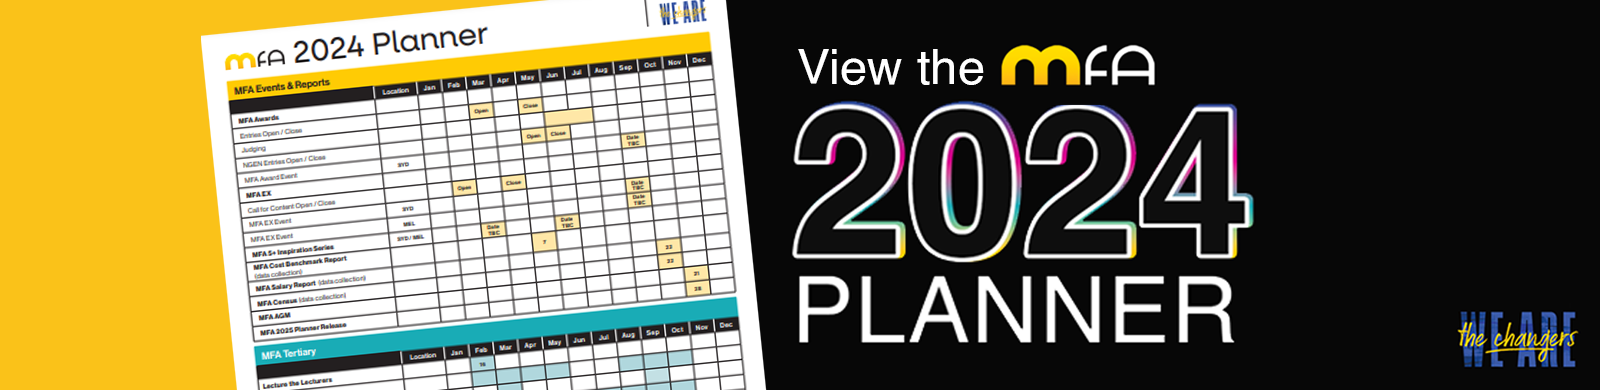 DRAFT_View_Planner_2024_Homepage_Banner